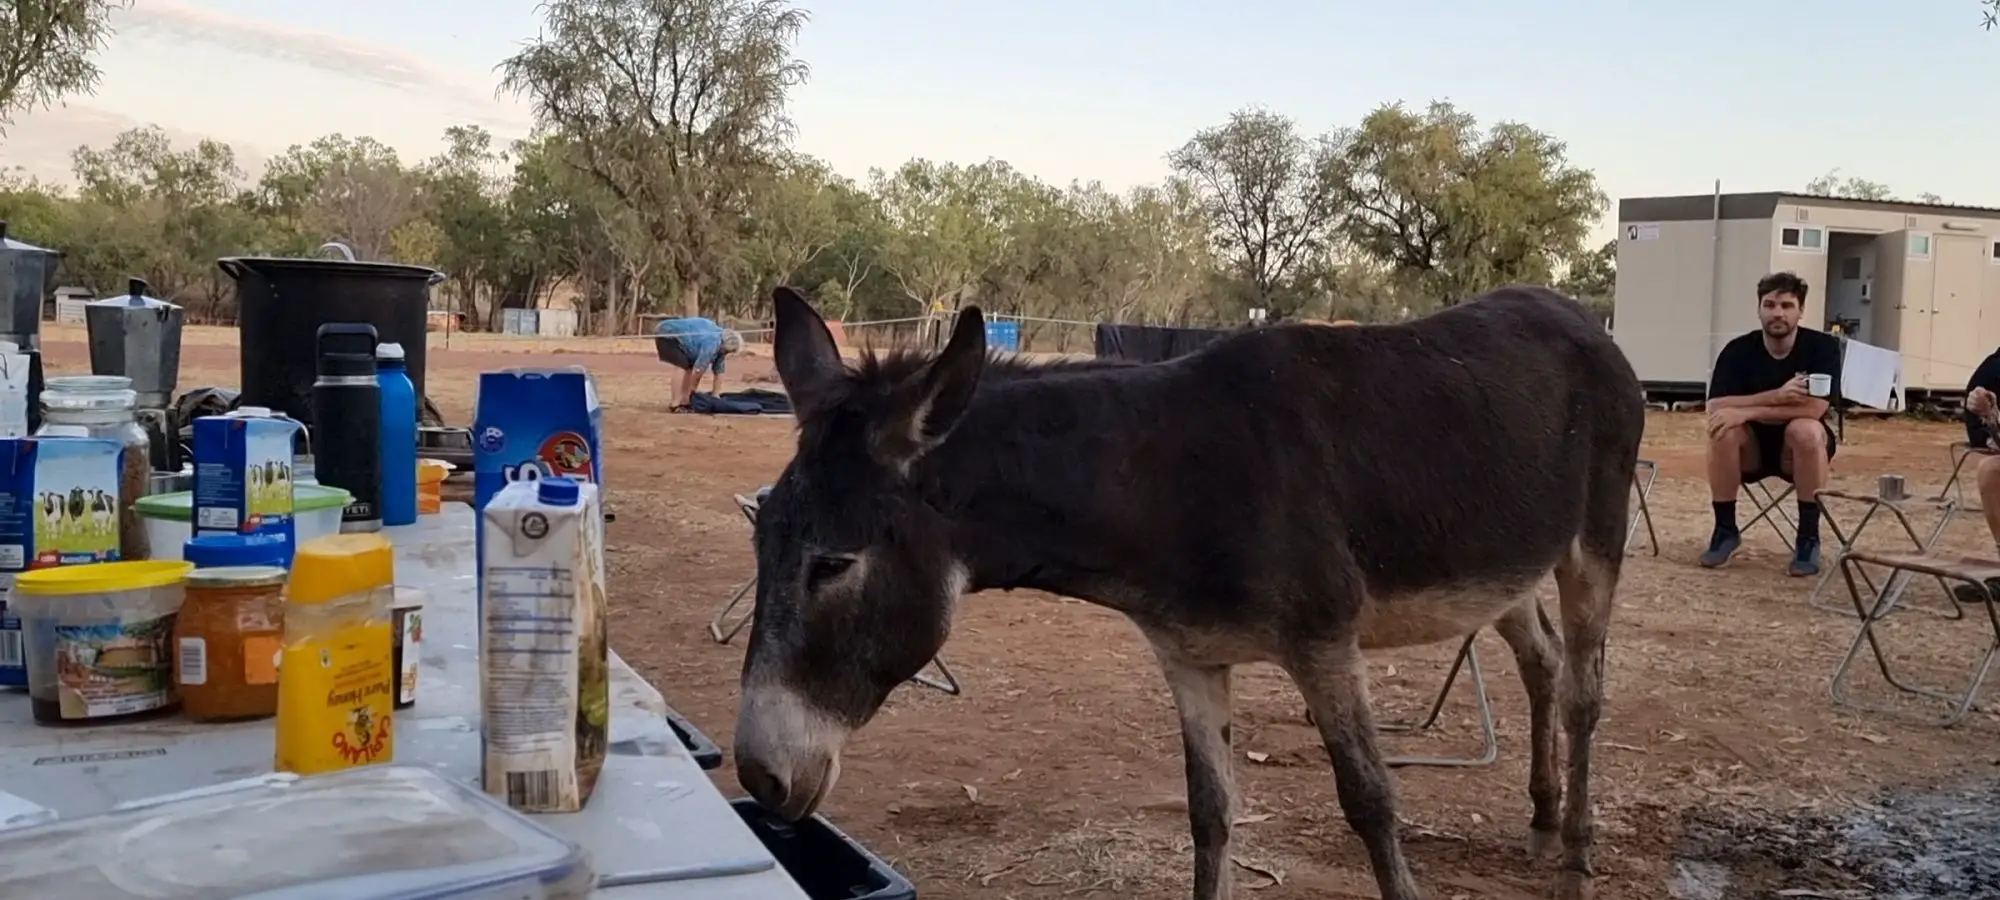 Broome to Darwin Tour - a donkey comes into camp at El Questro Station camp